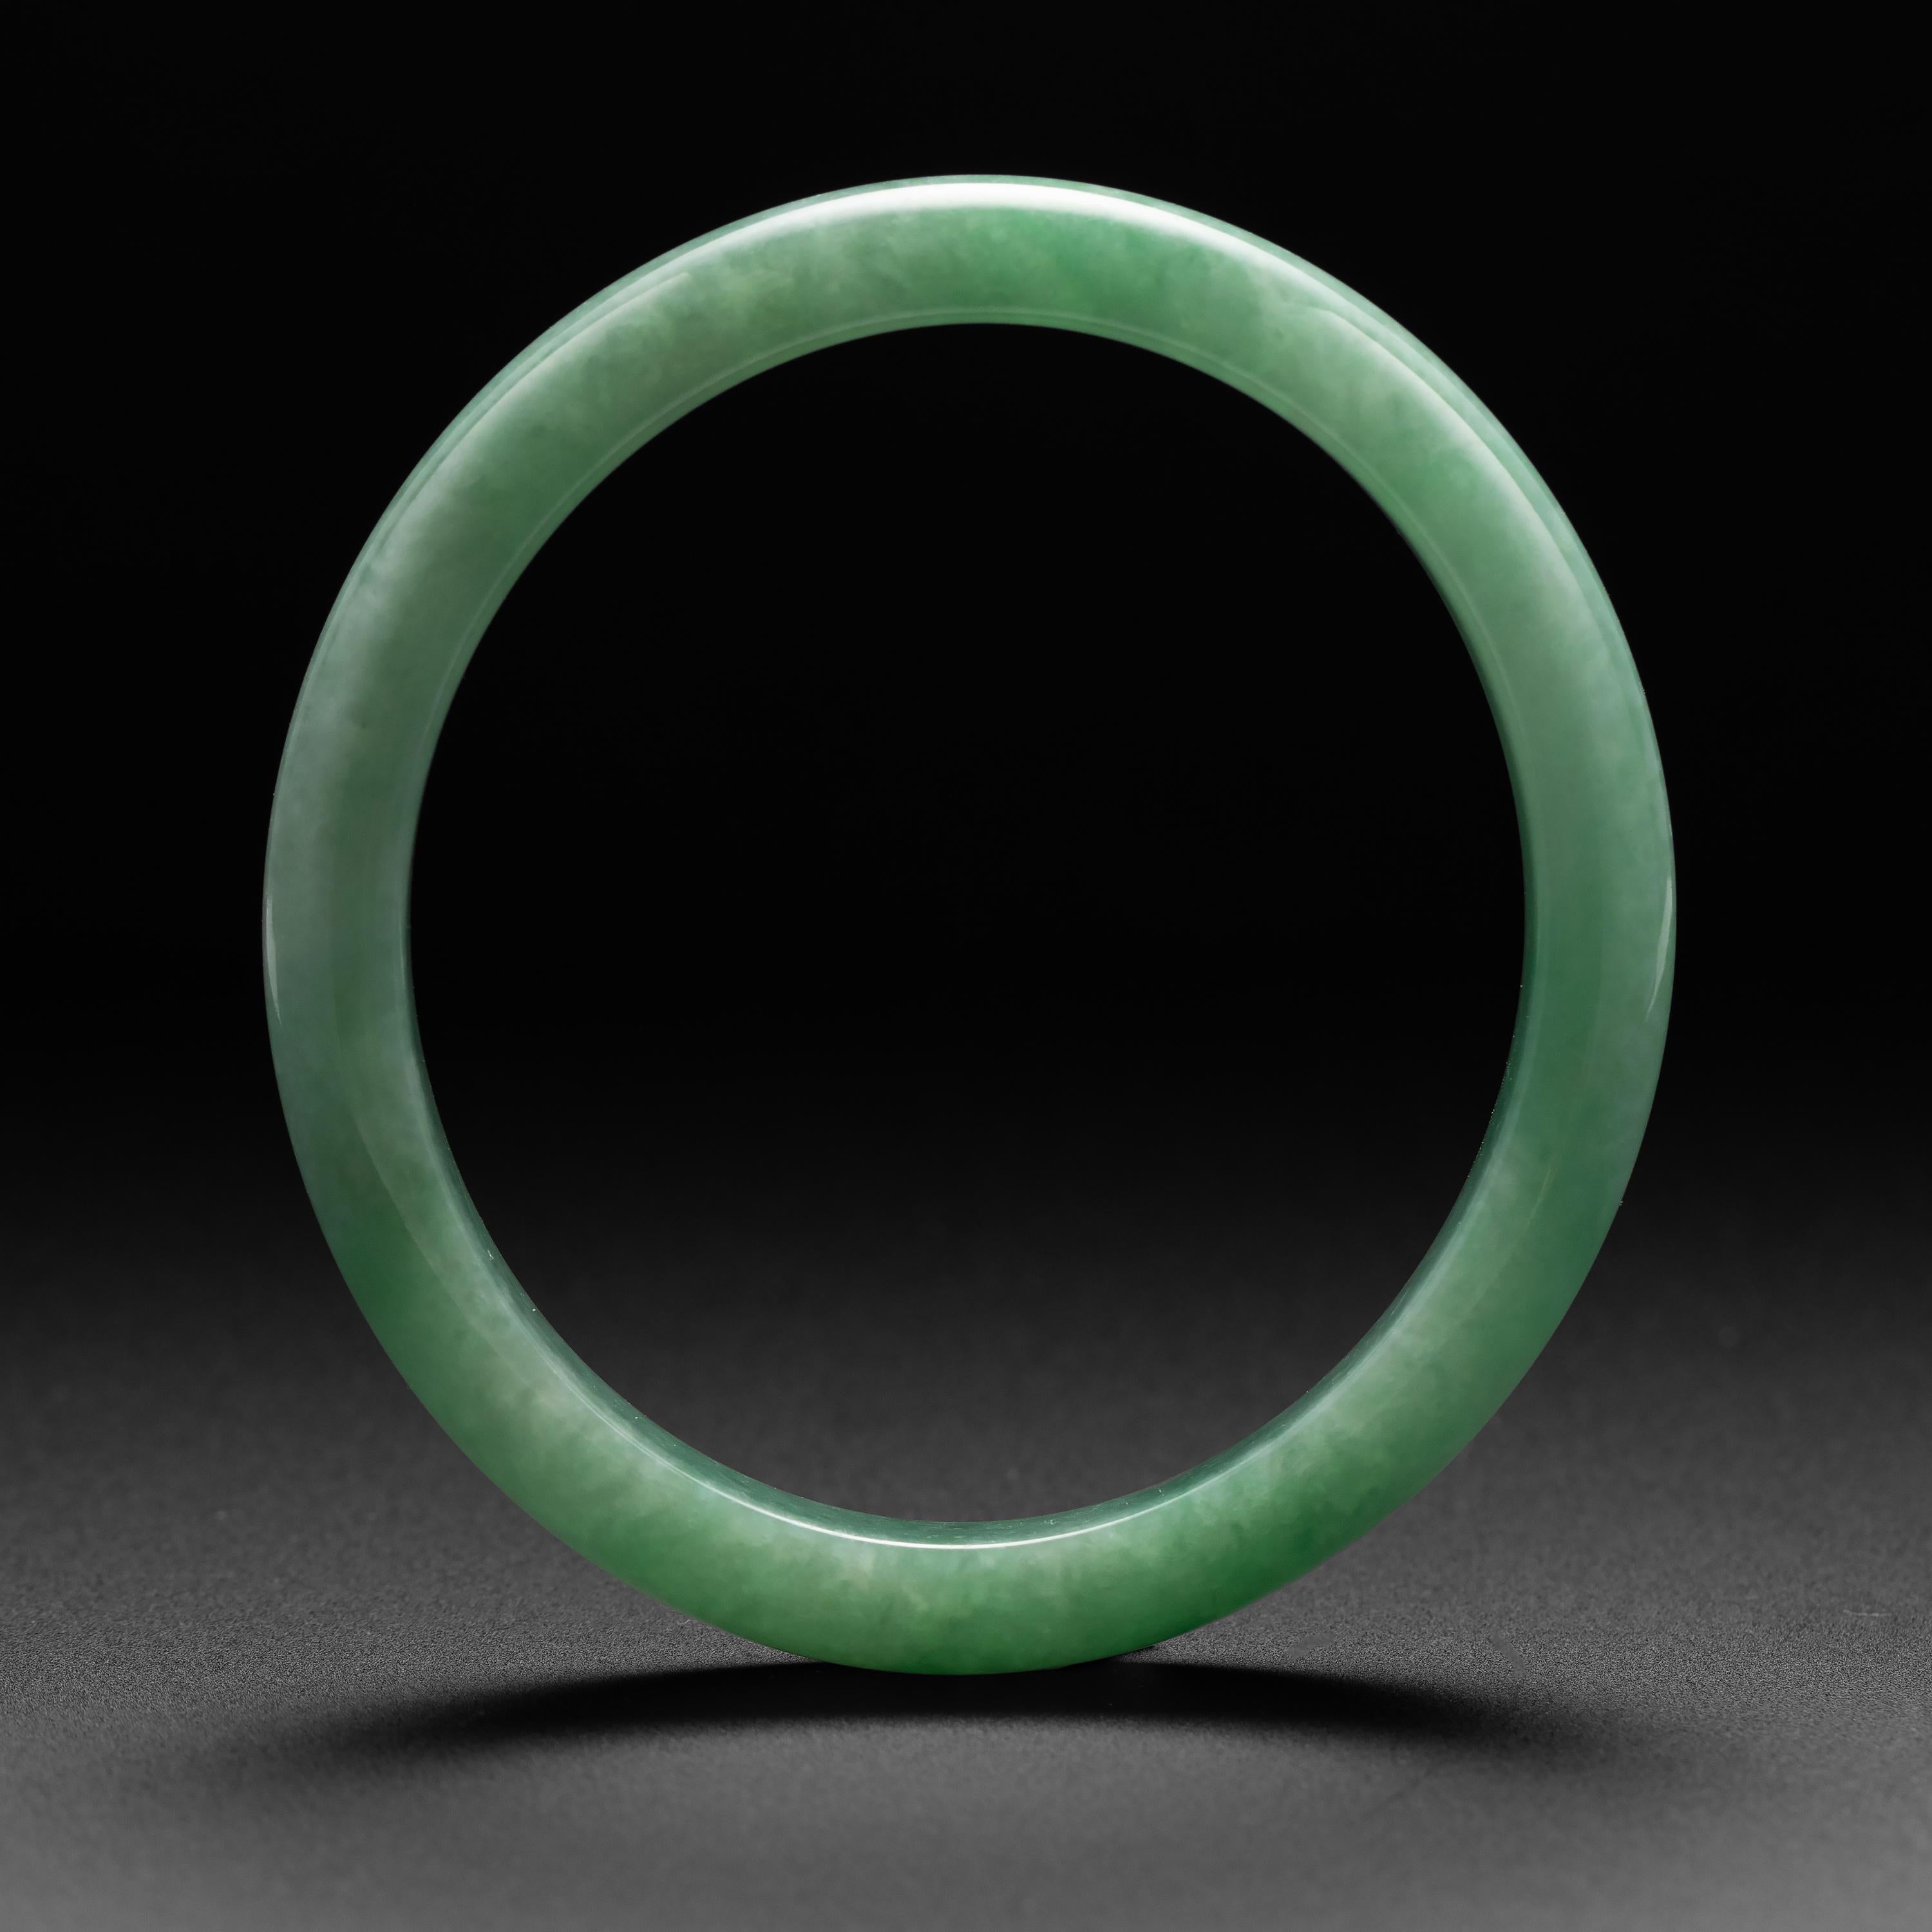 Rare and beautiful, this fresh and light apple green jadeite jade bangle is certified to be natural and untreated. The bangle has been carved in a slightly oval form making it very comfortable for daily wear. The interior diameter at the widest